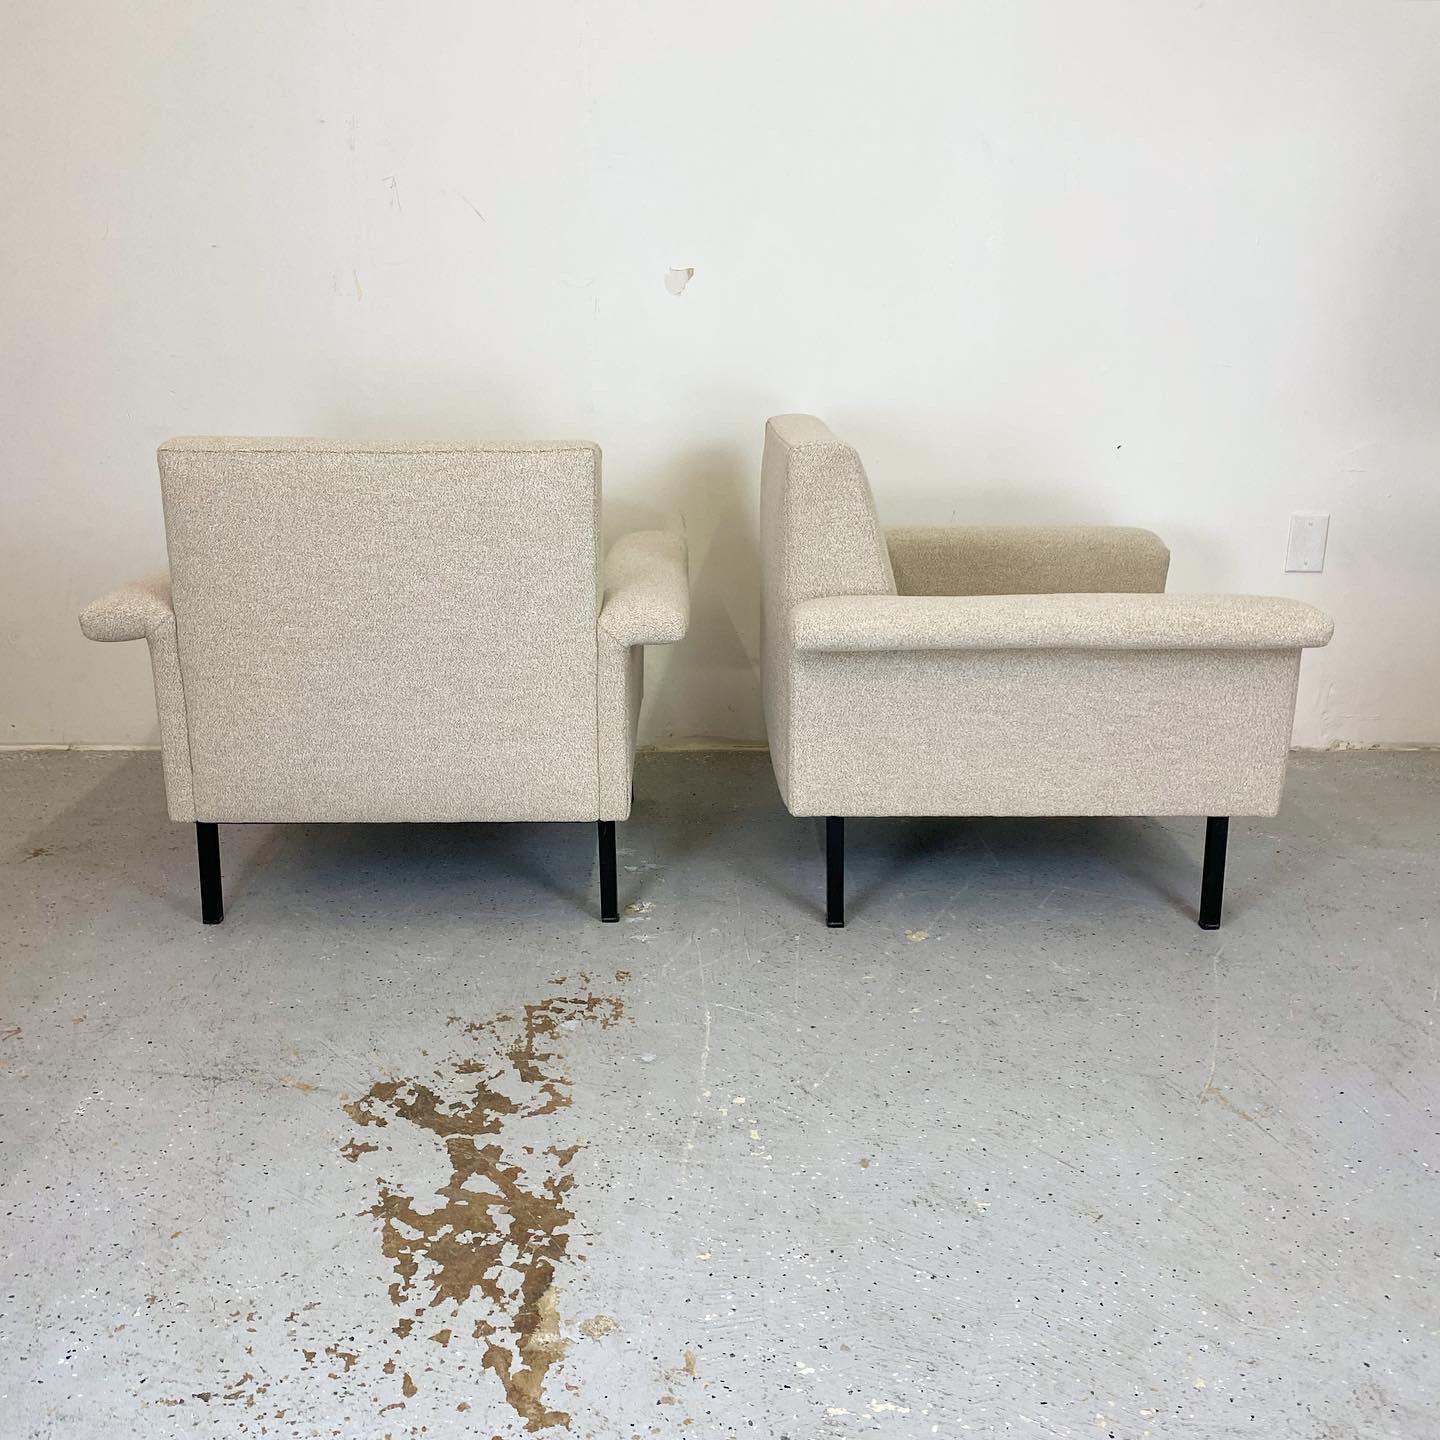 This mid century pair of club chairs have been expertly reupholstered in a soft oatmeal boucle. They have a great architectural look with a wide stance. The welded steel frame has been left in its original paint which shows age and patina. A great